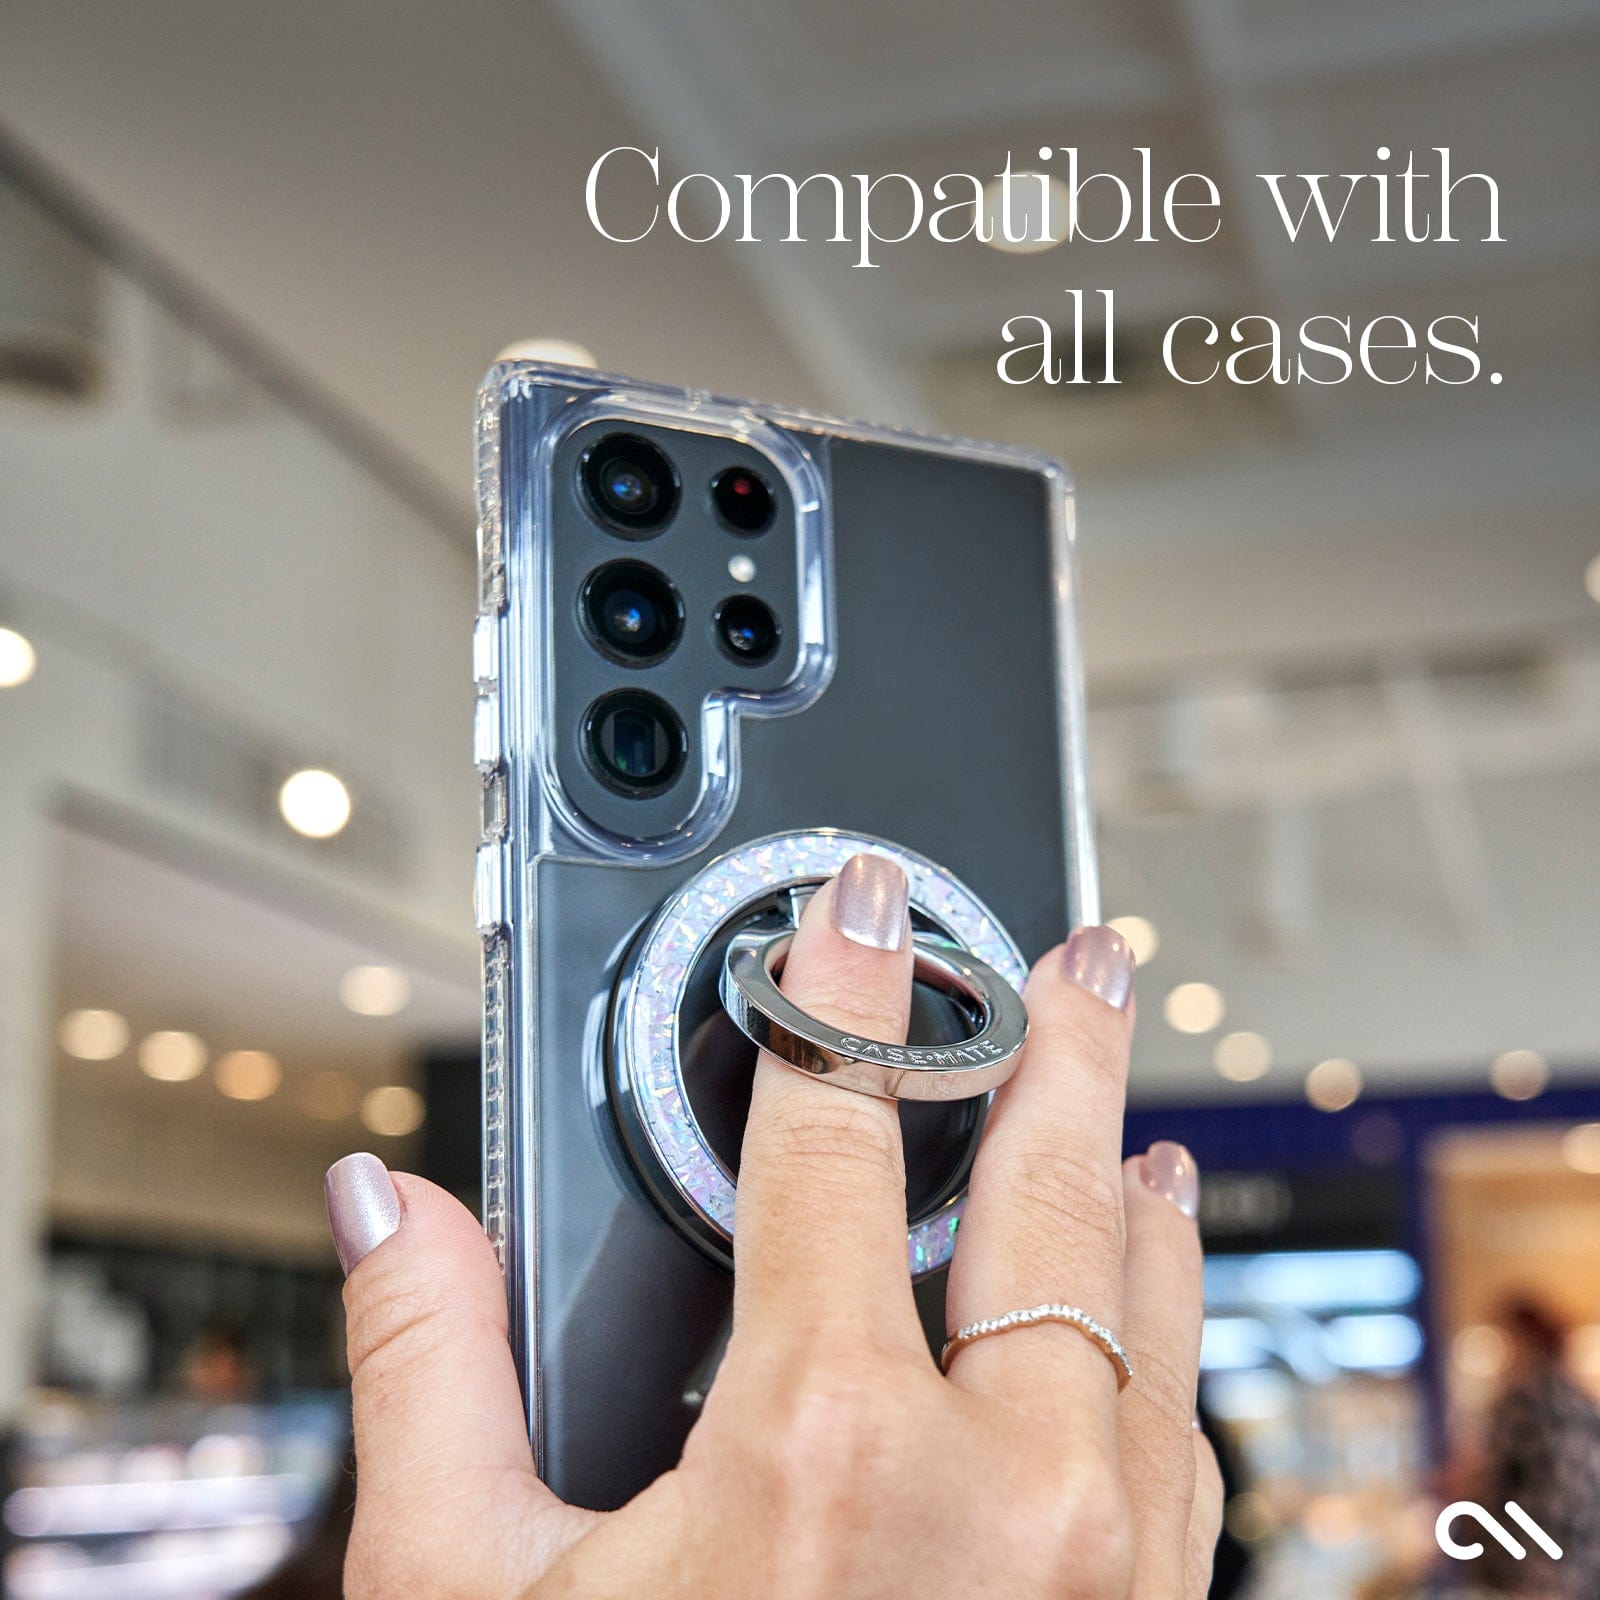 COMPATIBLE WITH ALL CASES